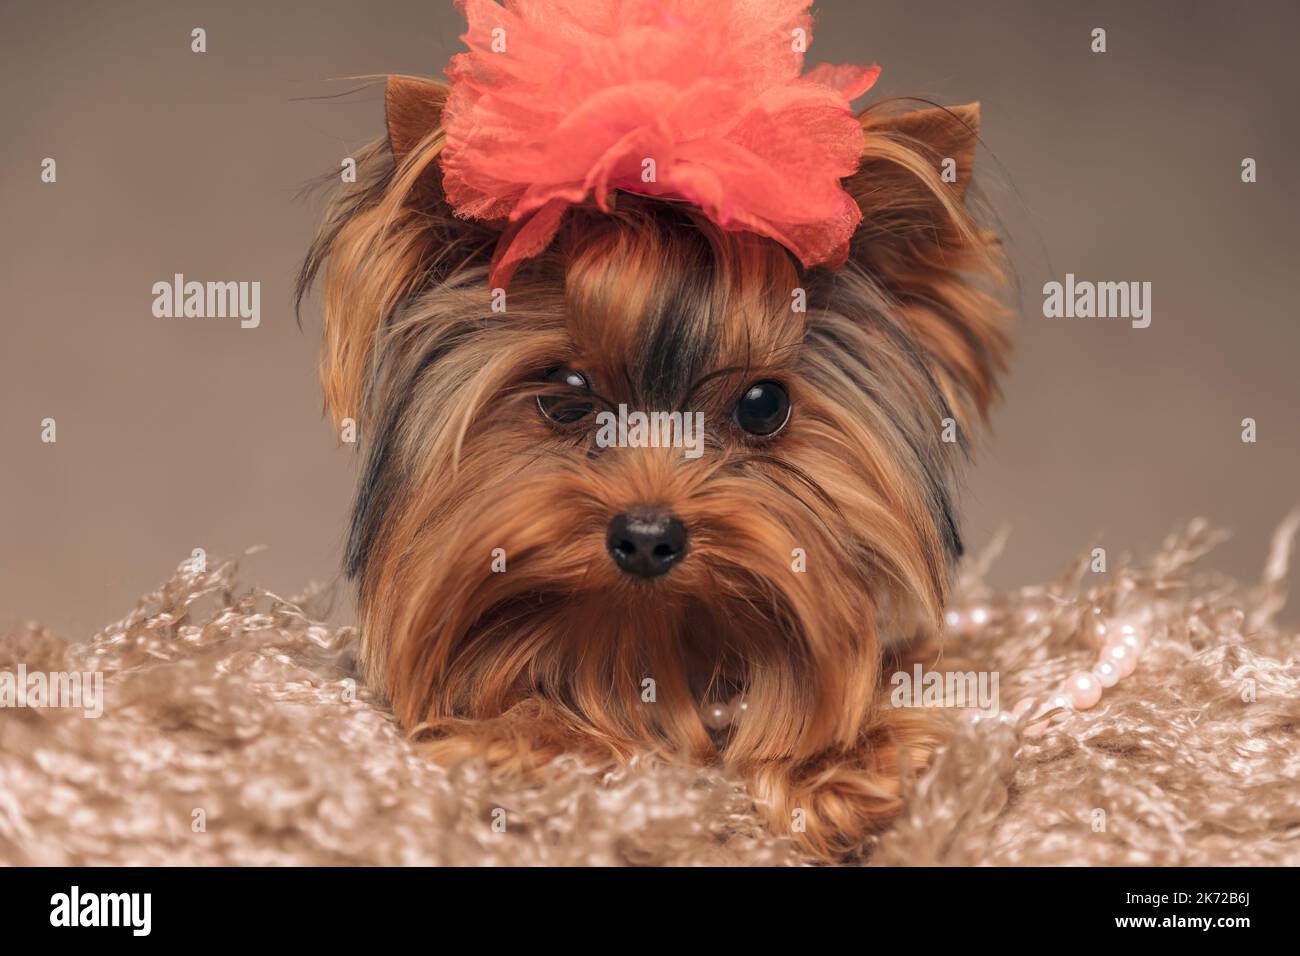 close up picture of sweet yorkshire terrier dog with red flower on head laying down on carpet and posing in front of beige background Stock Photo